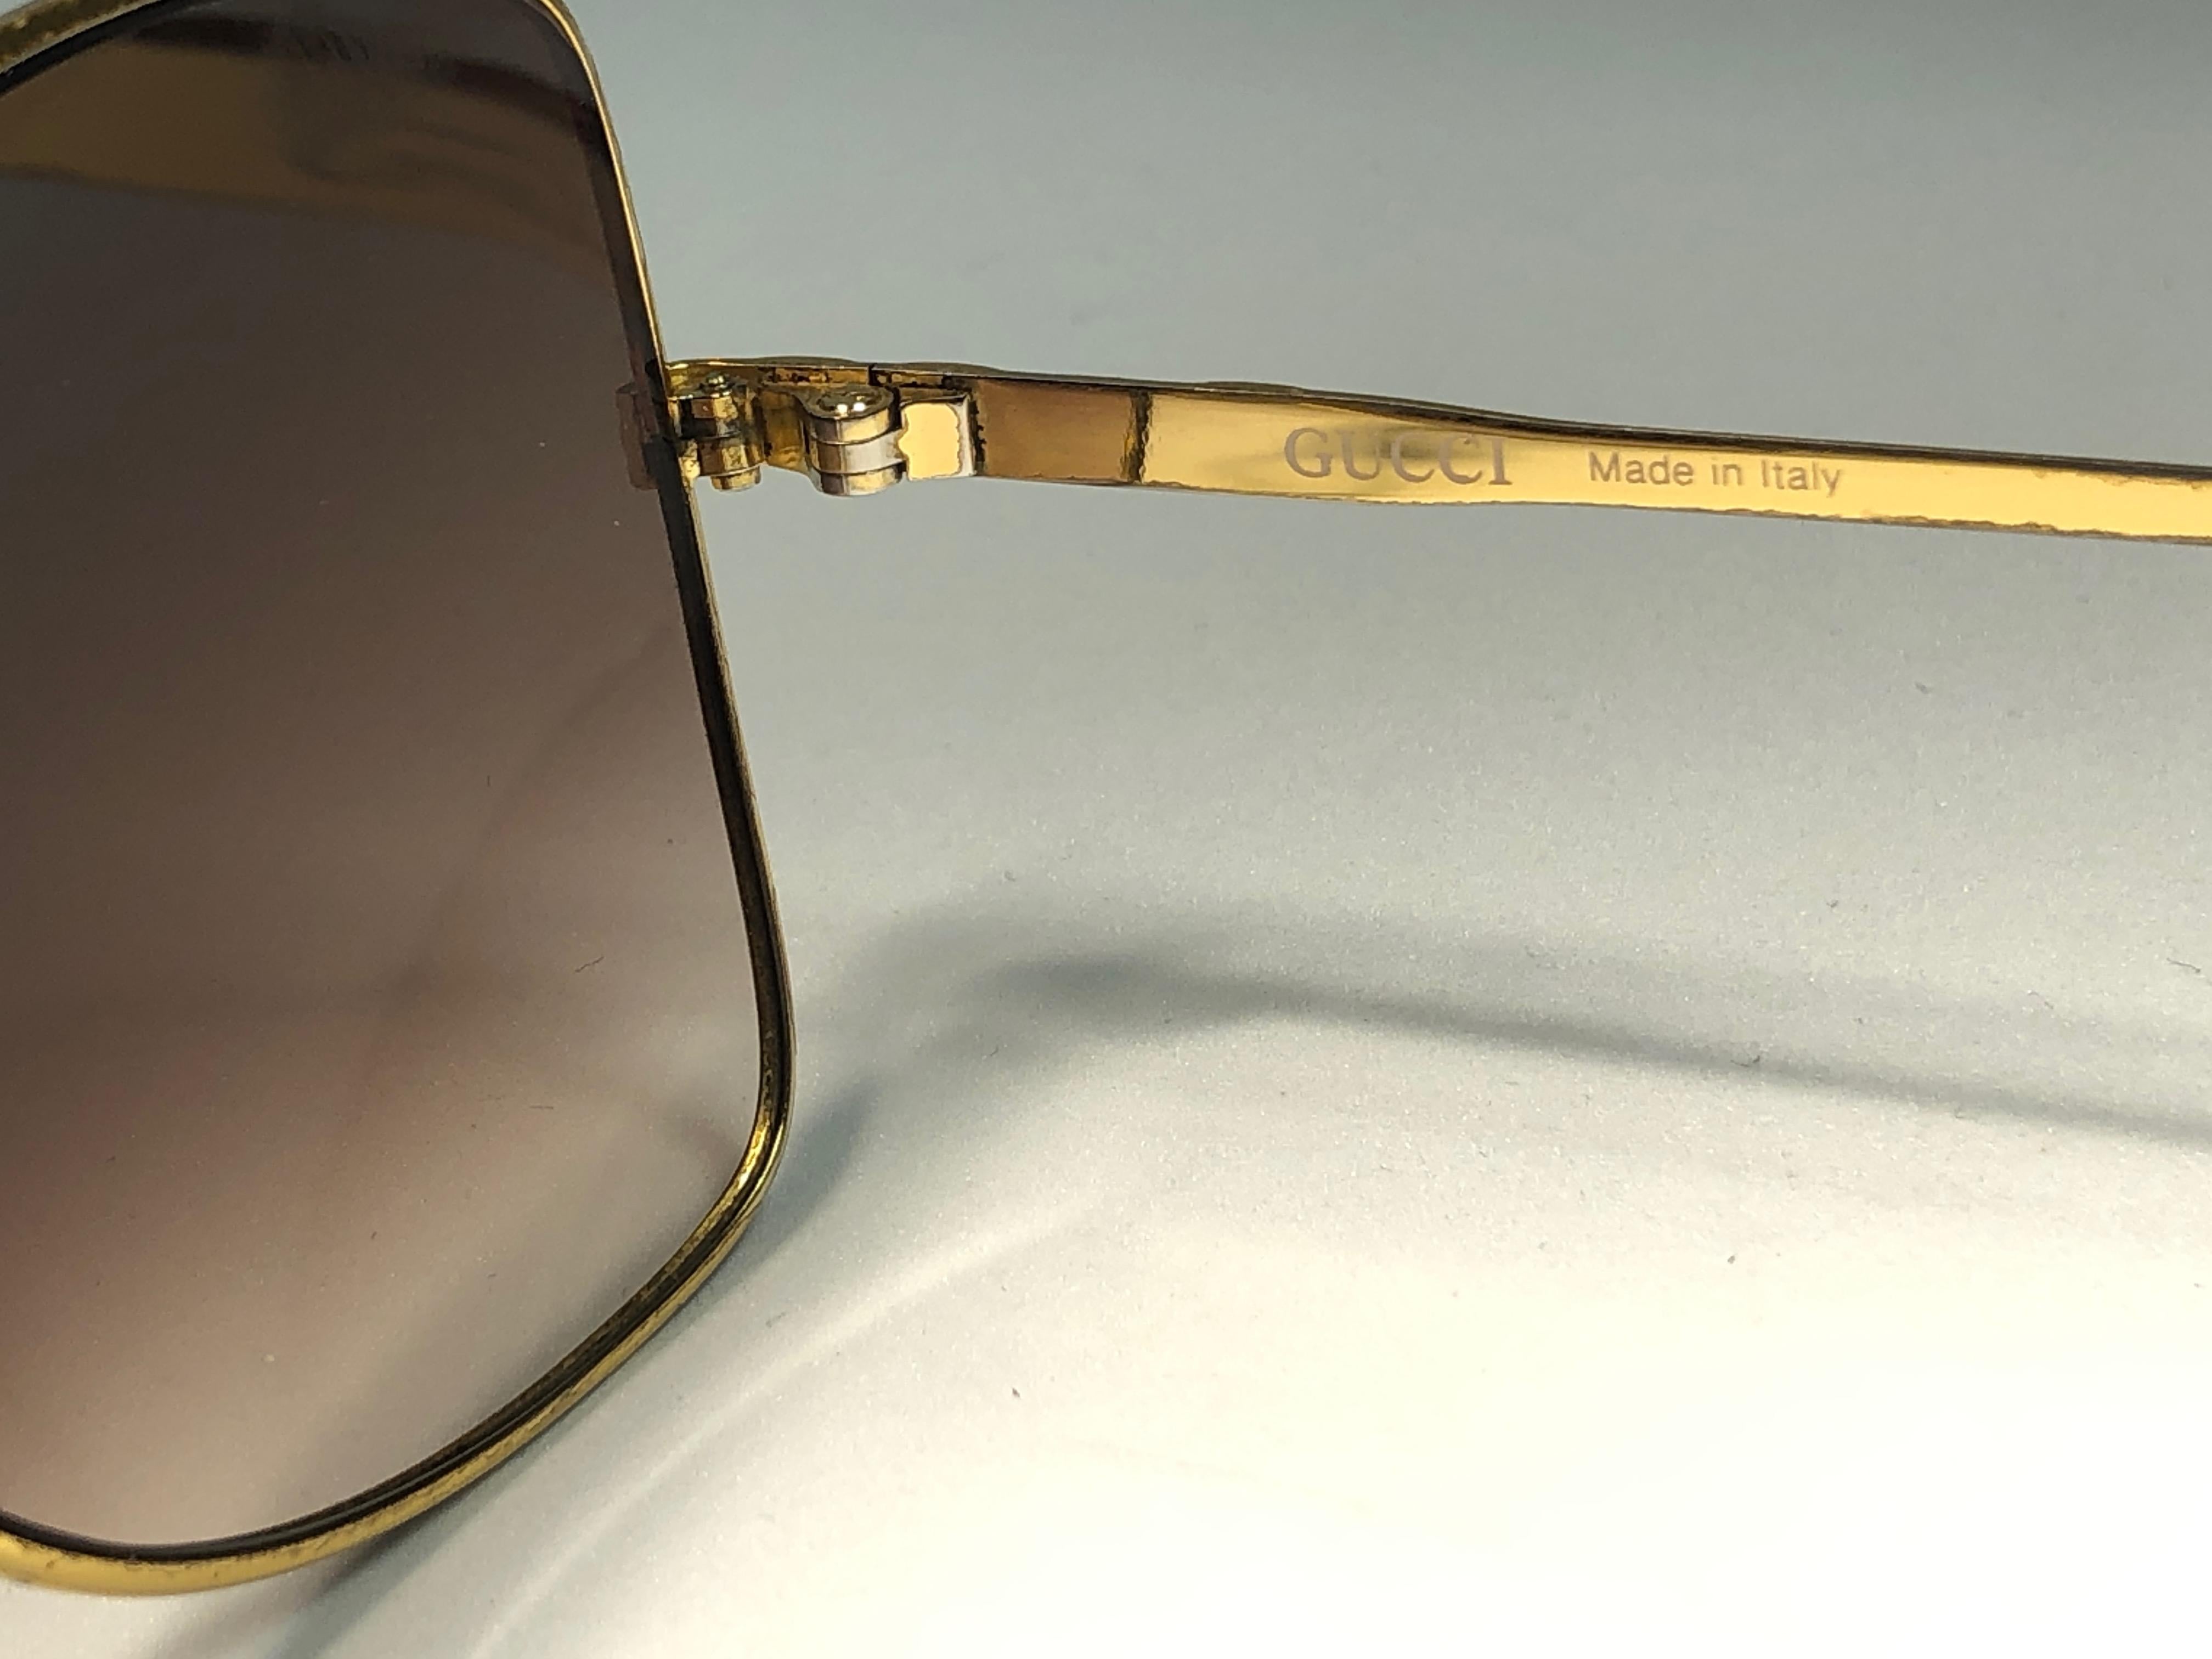 Black Mint Vintage Gucci 2219 Sunglasses Burgundy & Gold 1990's Made in Italy